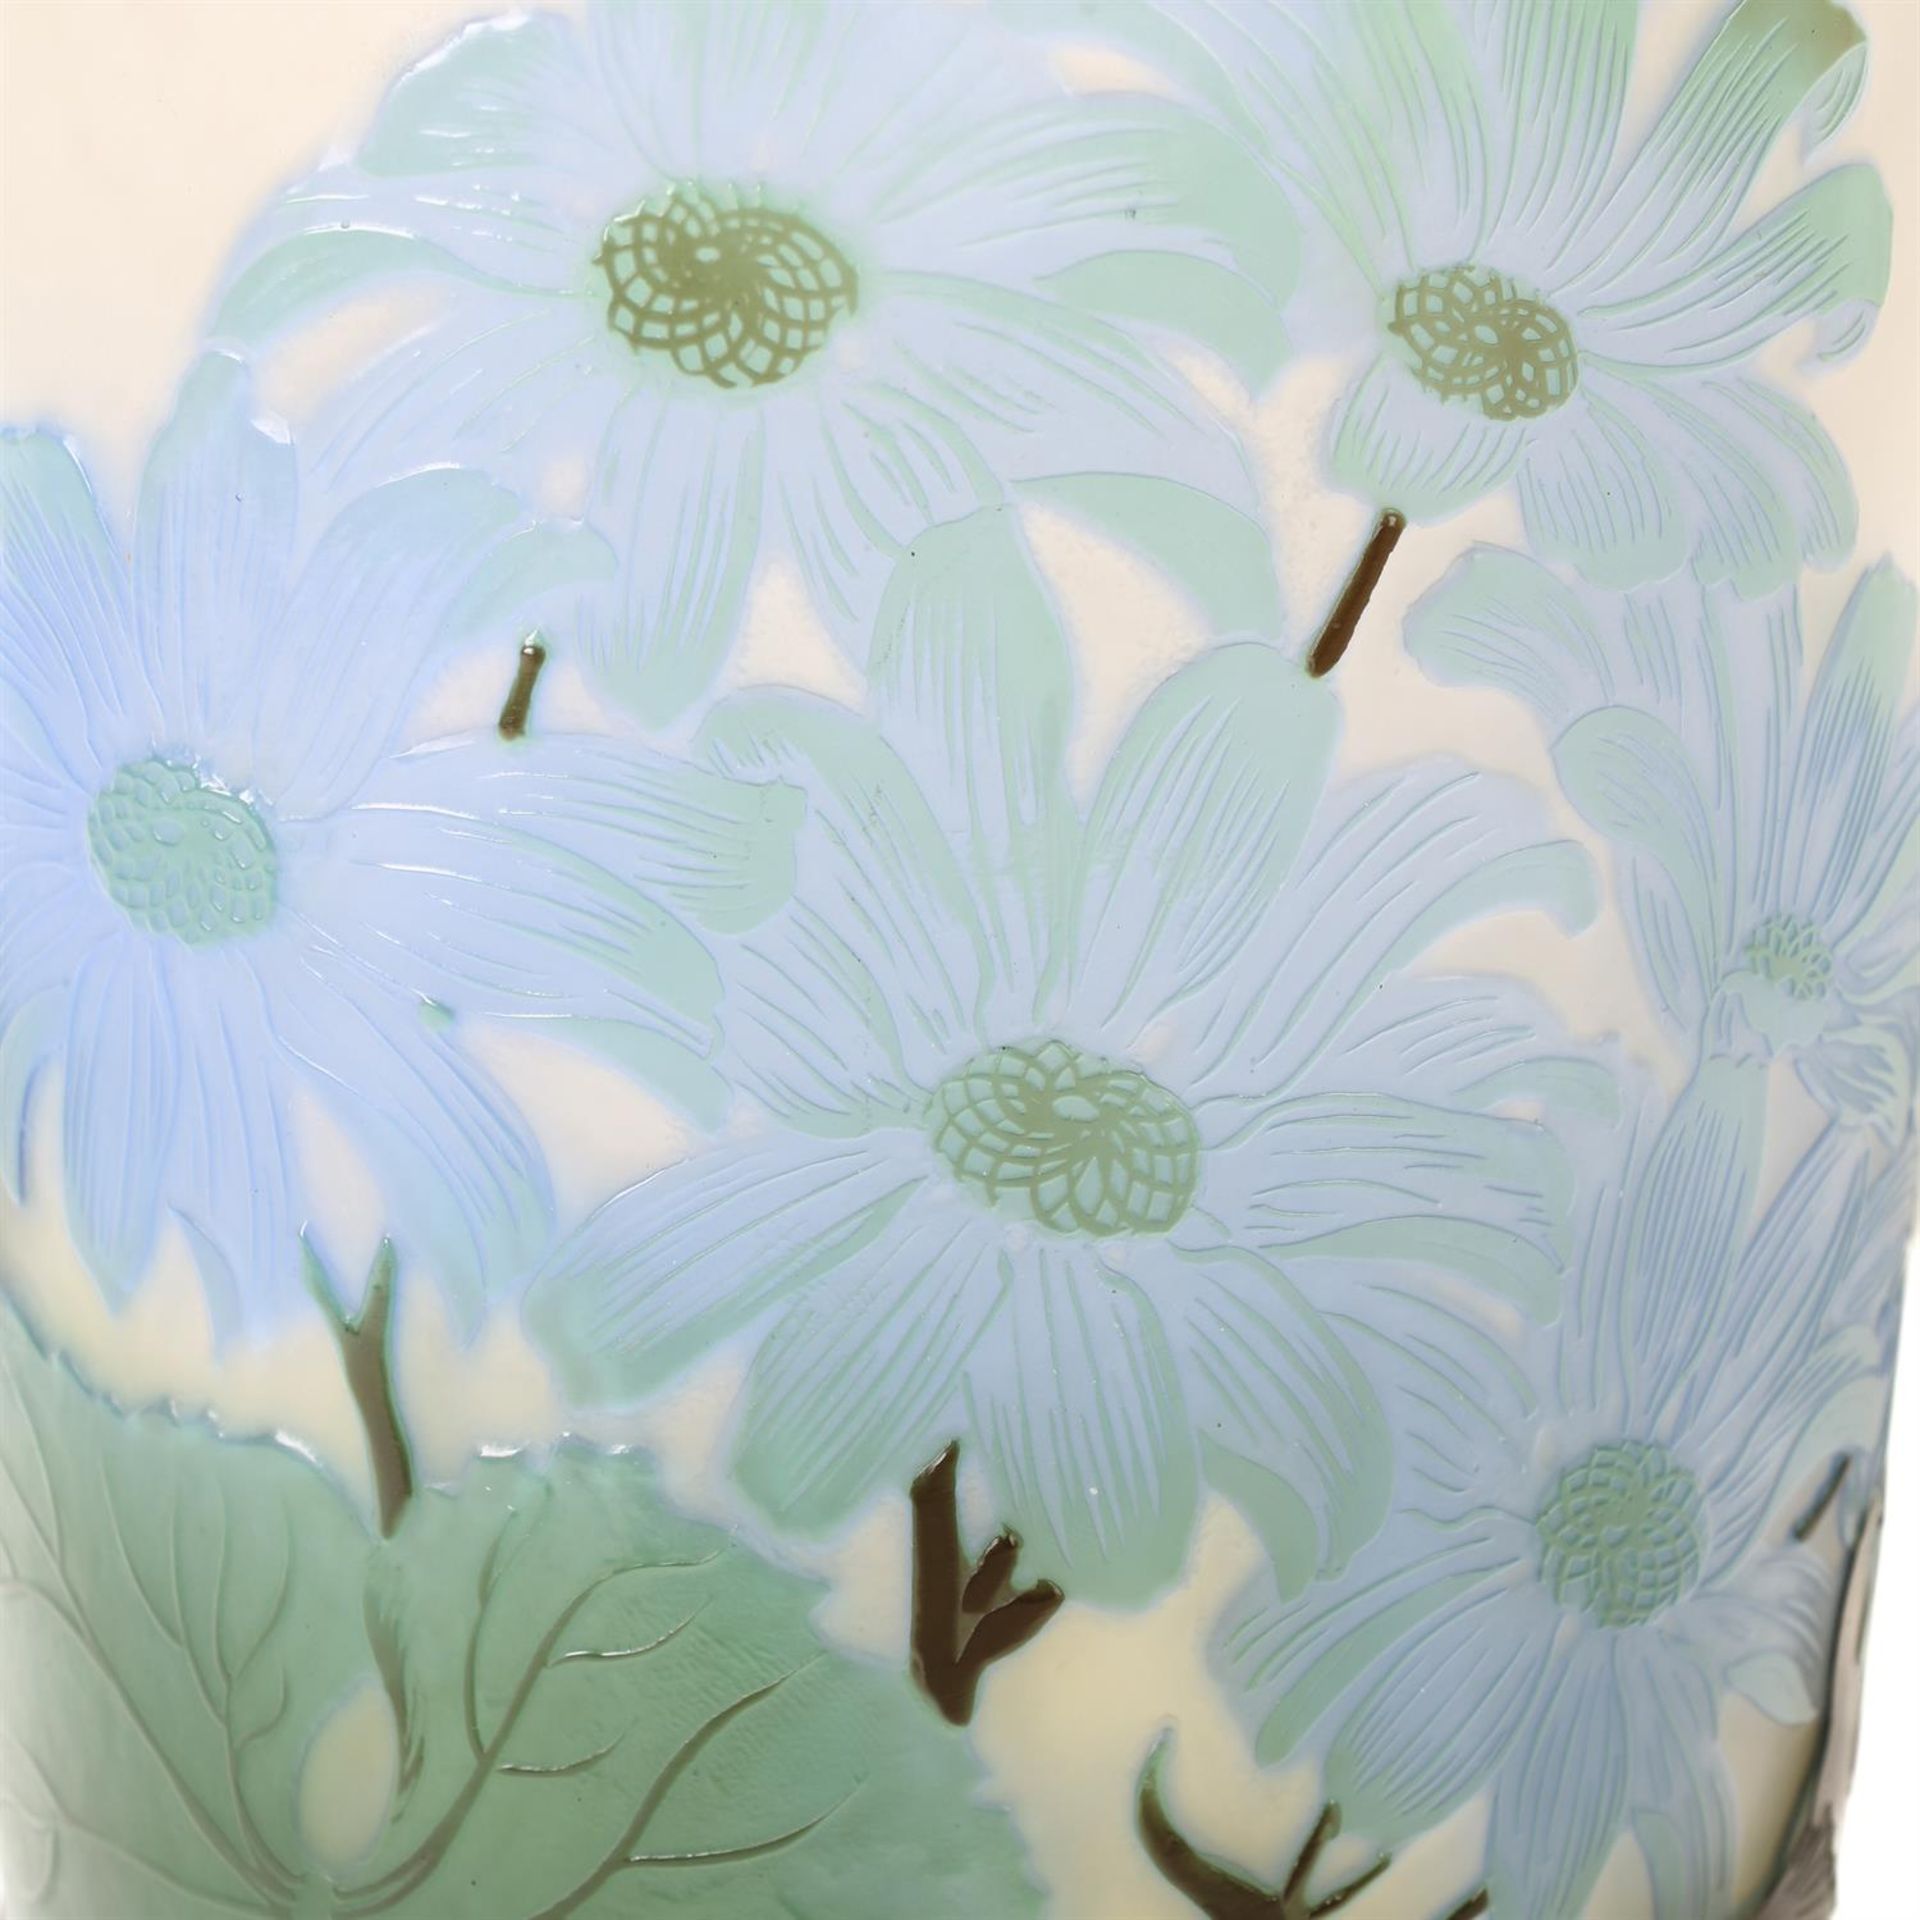 Emile Galle cameo glass vase with daisies - Image 8 of 8